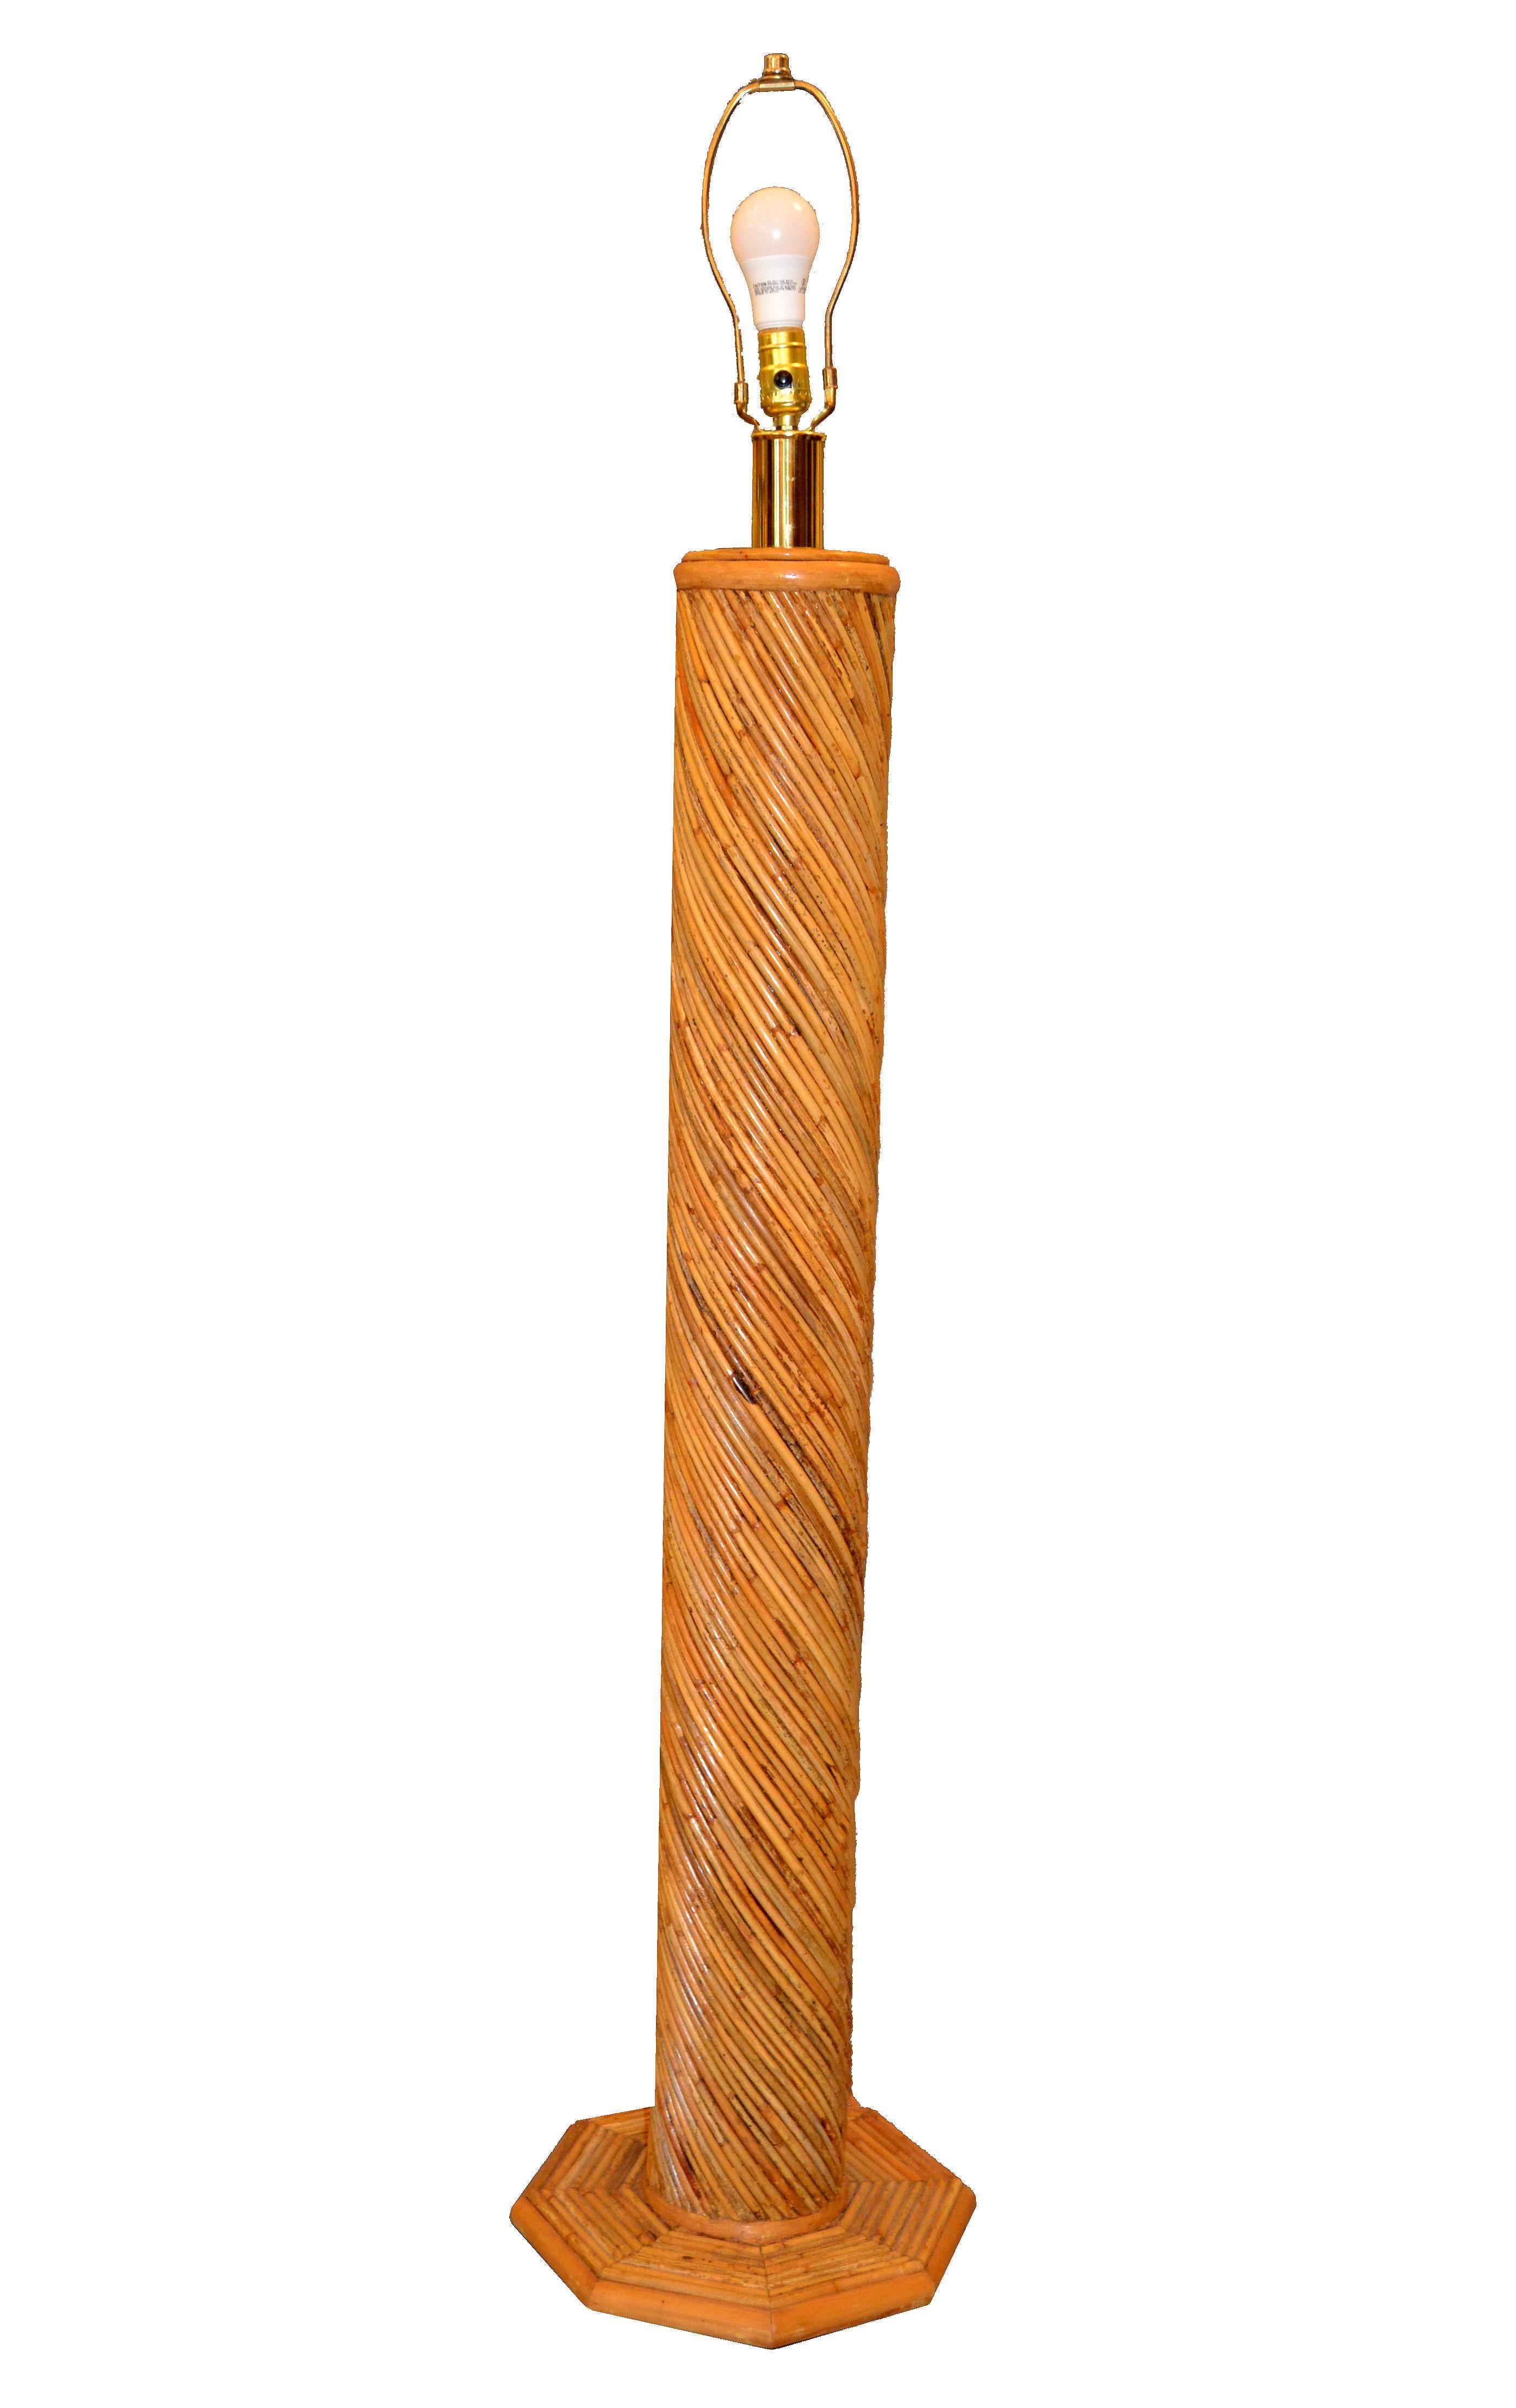 Handcrafted tall Mid-Century Modern pencil reed bamboo floor lamp with brass details.
Comes without the shade.
Is wired for the U.S. and uses a max. 60 watts light bulb.
Great addition for Your Sunroom.